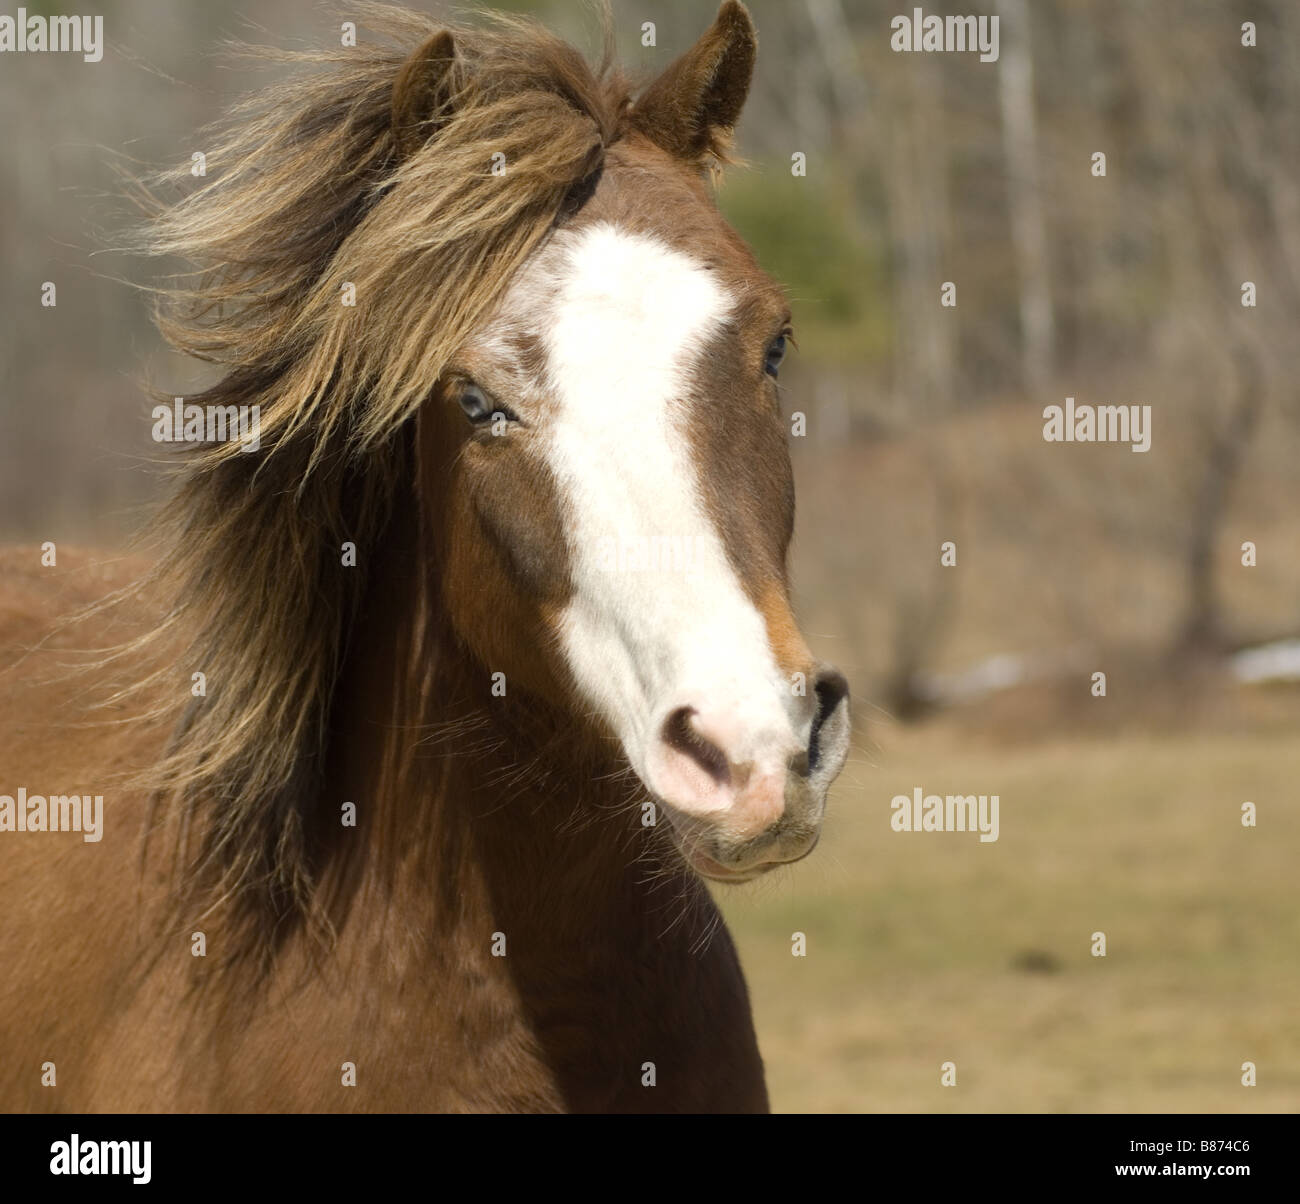 Frankie the Pony running in Maine Stock Photo